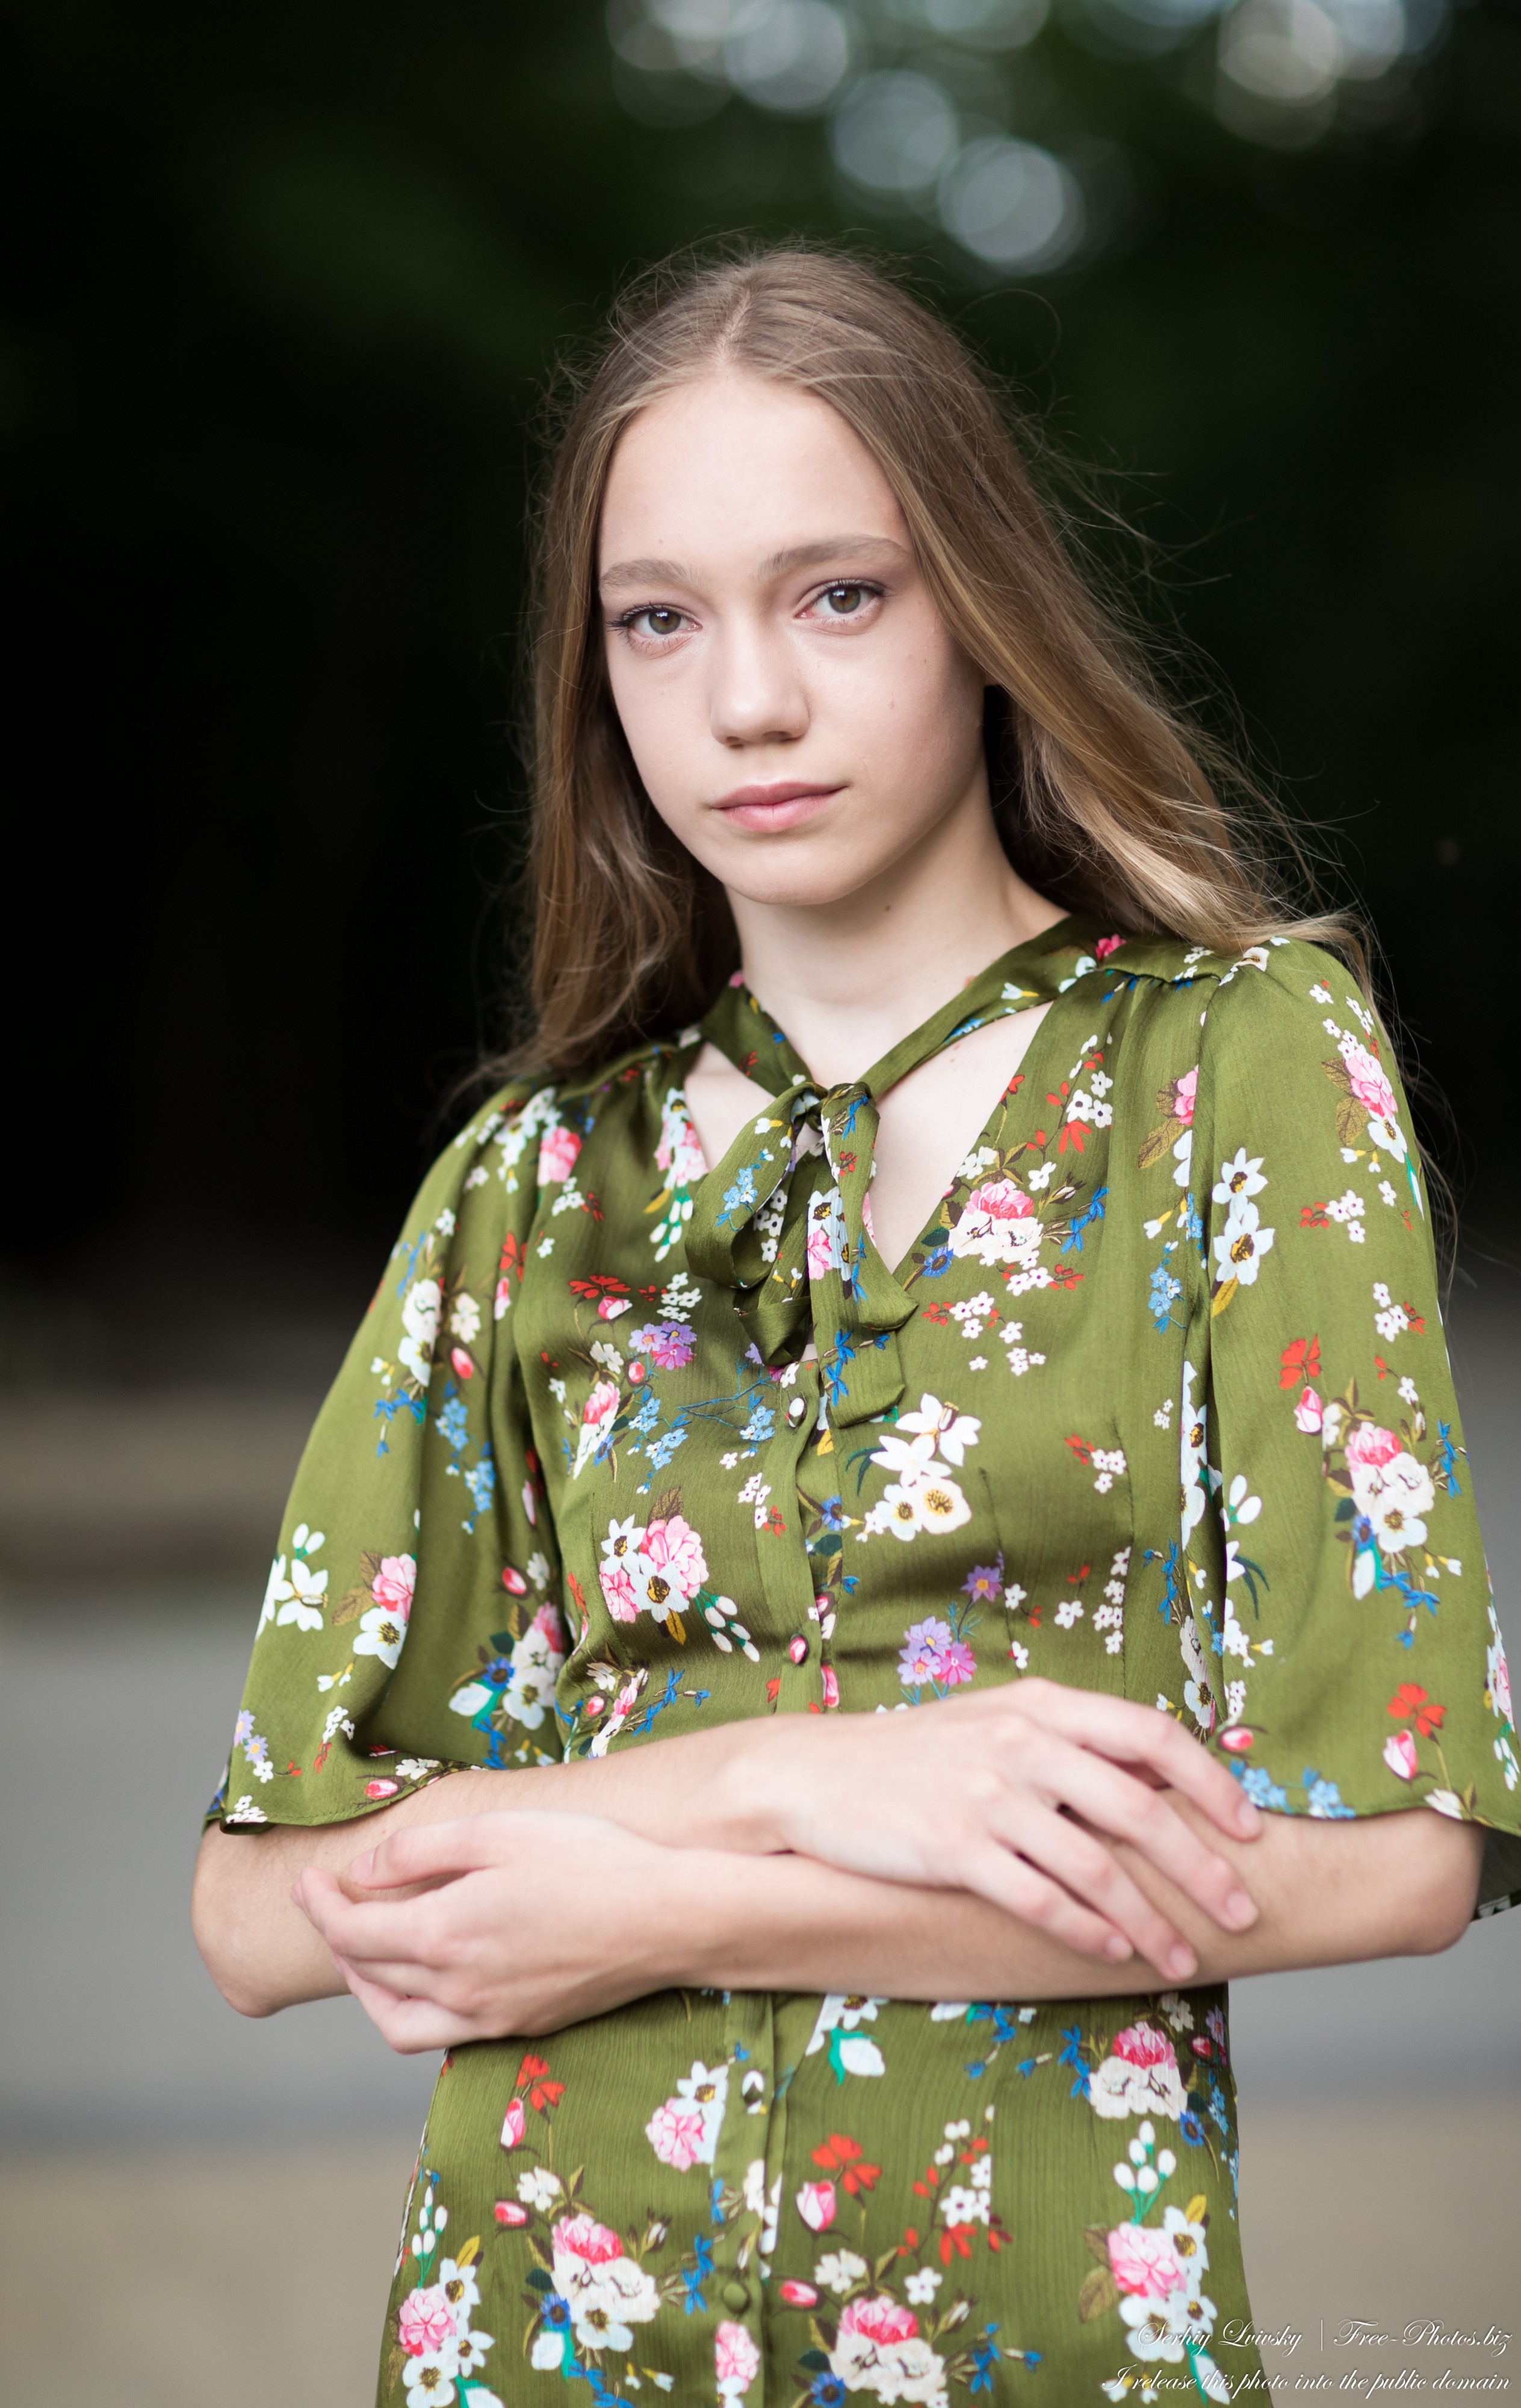 Photo Of Marta A 16 Year Old Natural Blonde Girl Photographed By Serhiy Lvivsky In July 2020